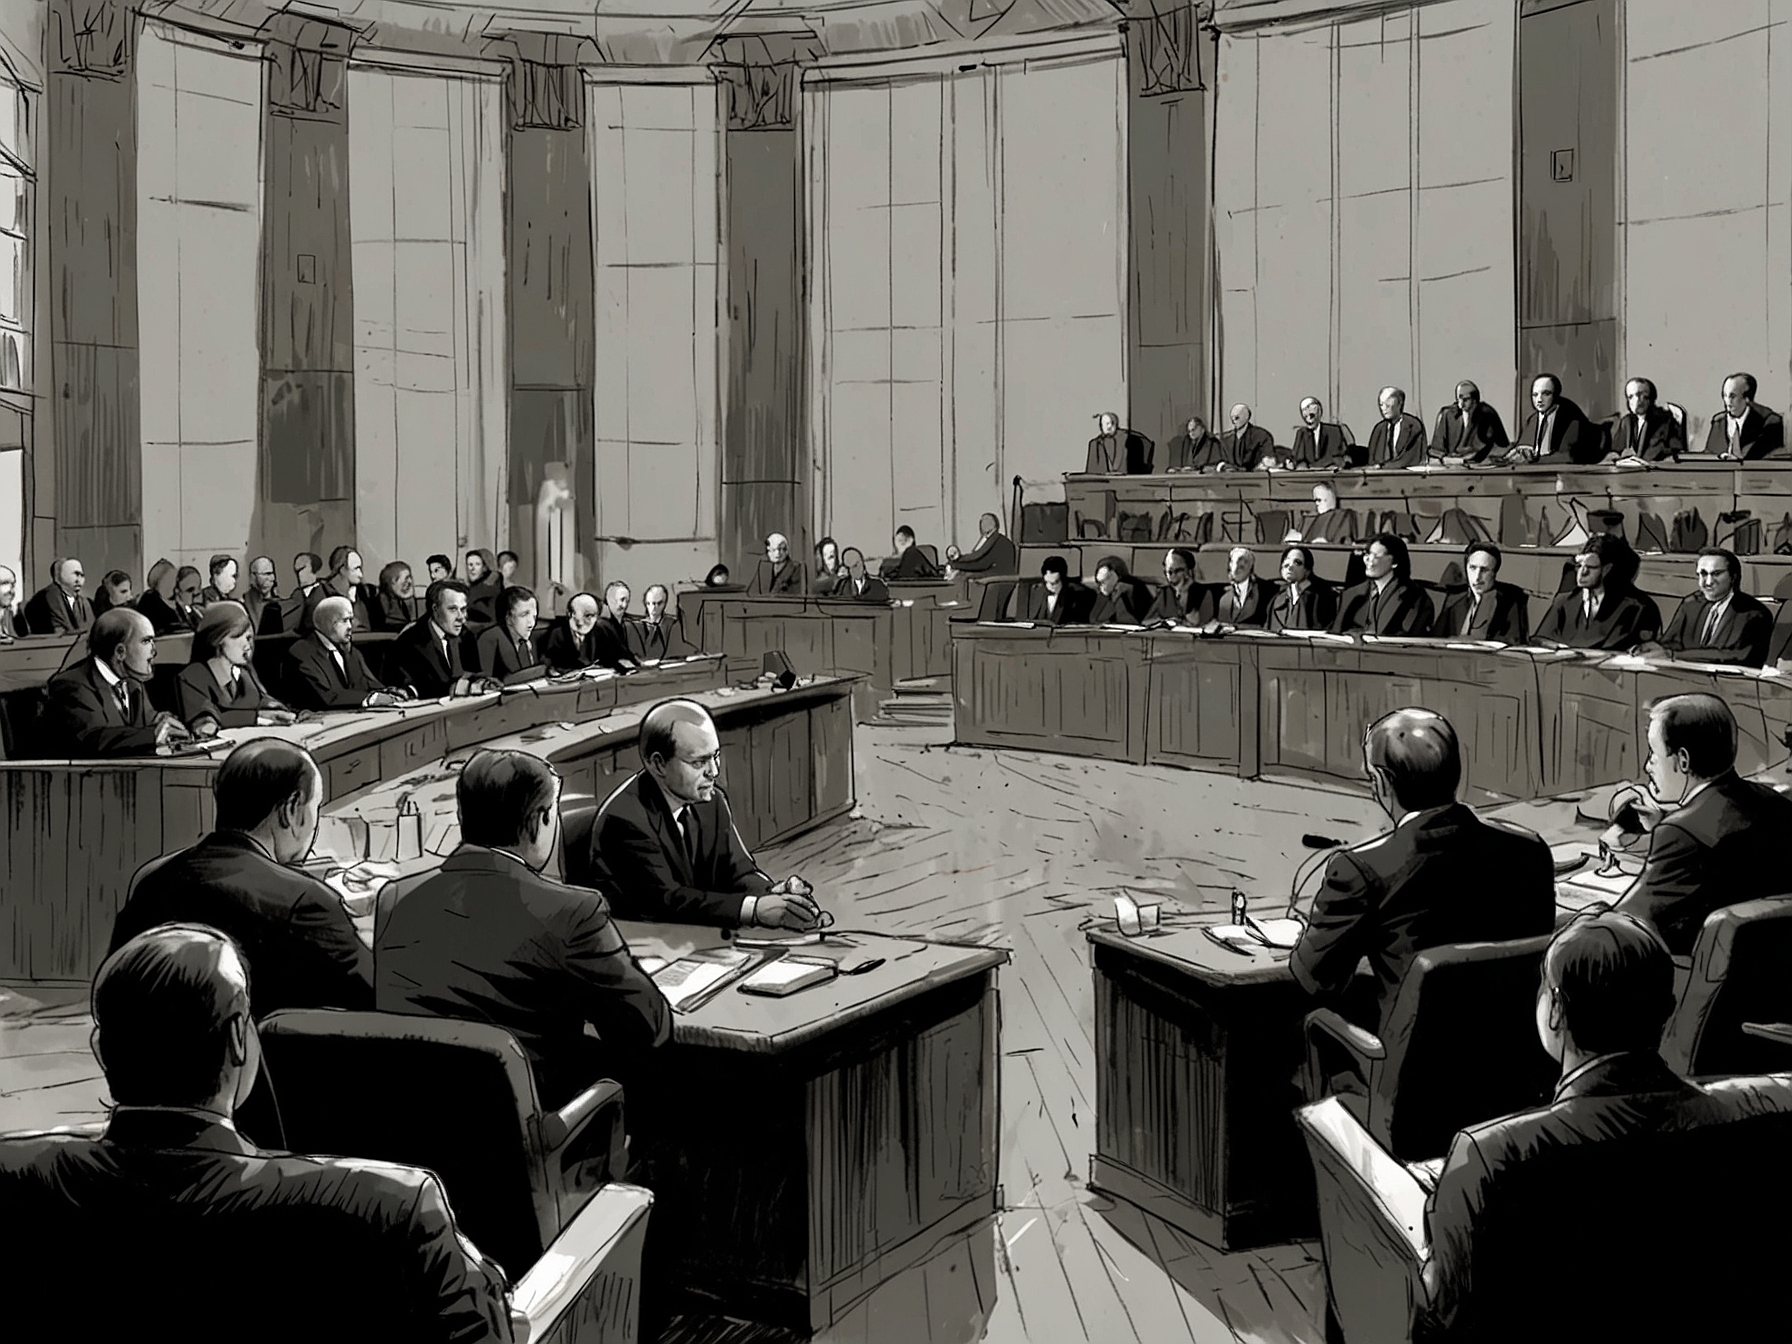 An image of the Russian State Duma in session, with lawmakers debating the proposal to increase income taxes for the wealthy, highlighting the legislative process in action.